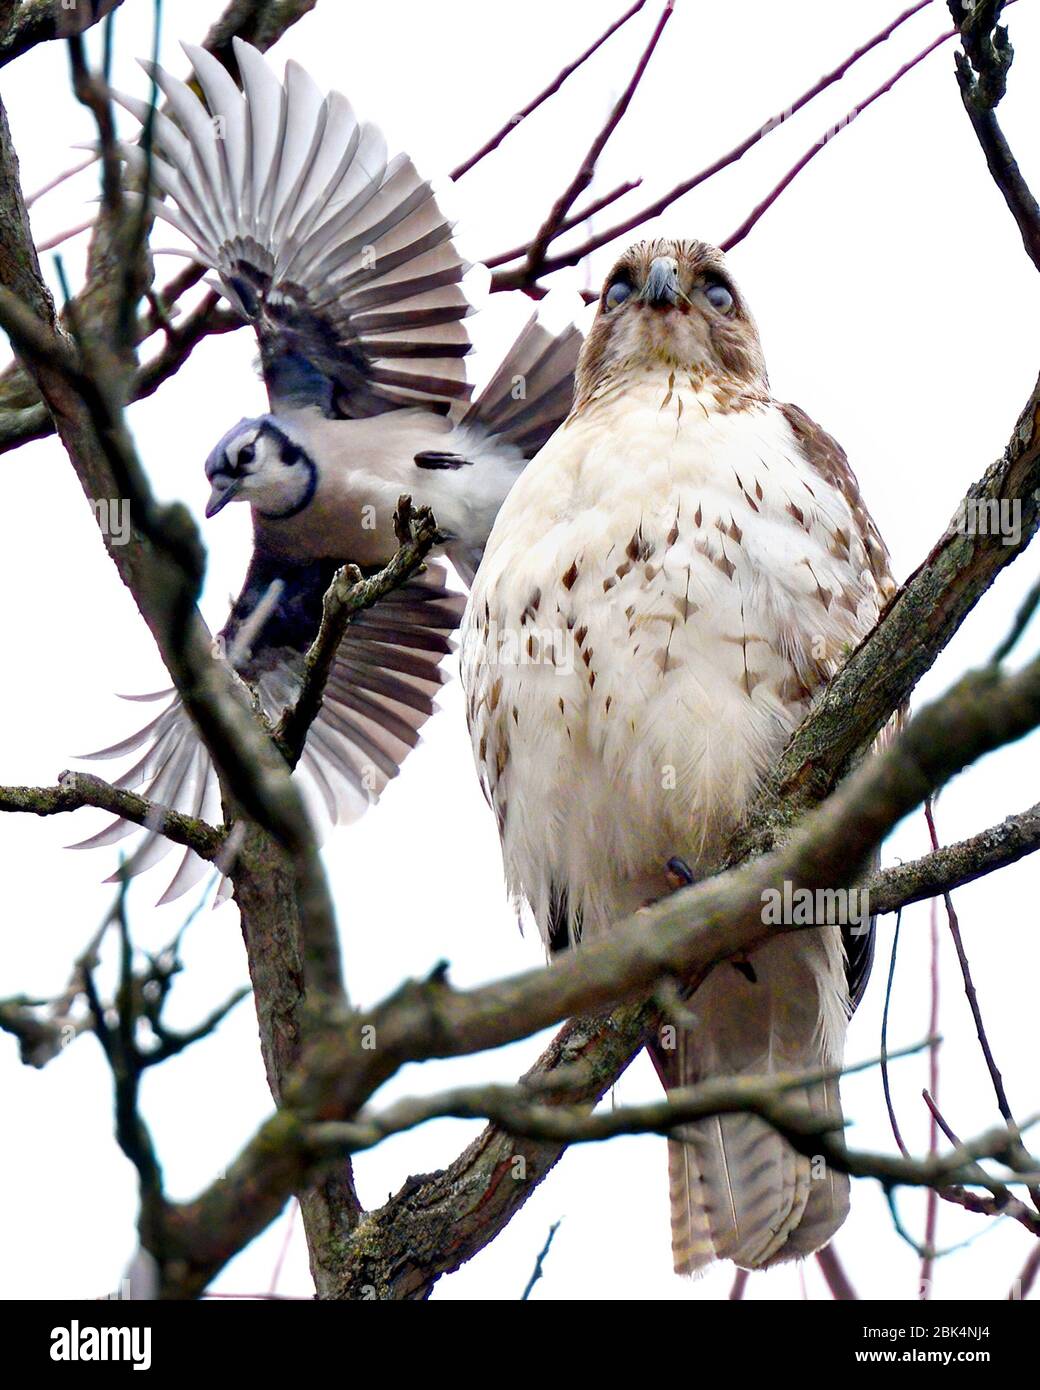 Hawk perched high on a tree branch being mobbed by an aggressive blue jay. Stock Photo